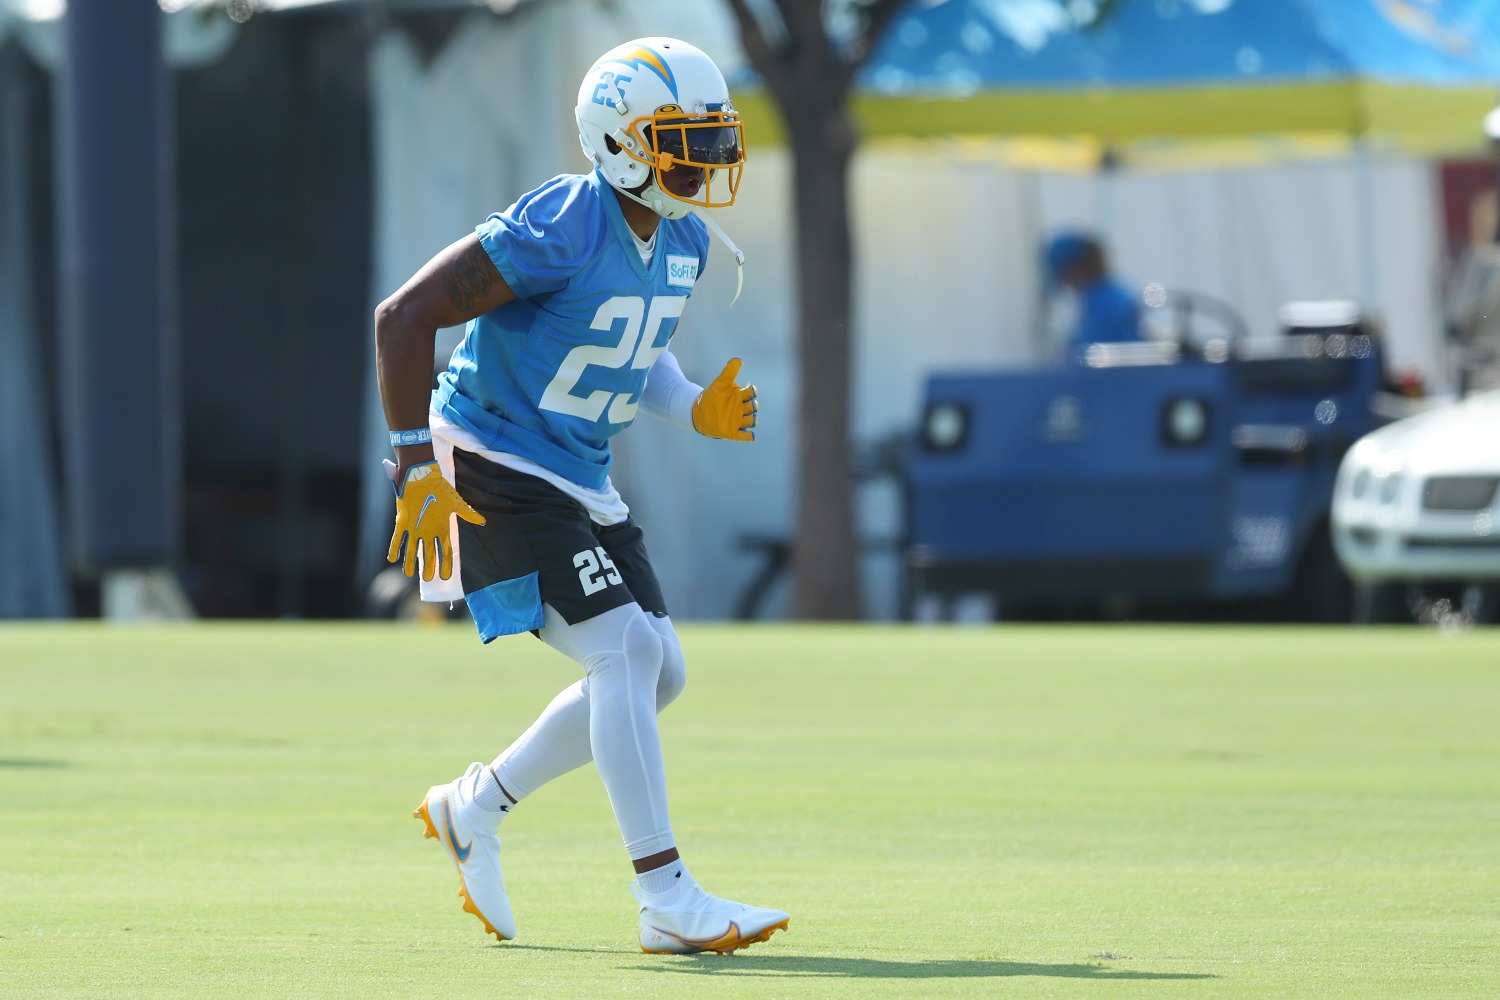 The Chargers will be without star cornerback Chris Harris for at least a month after the veteran sustained a foot injury in Sunday's loss to the Panthers.